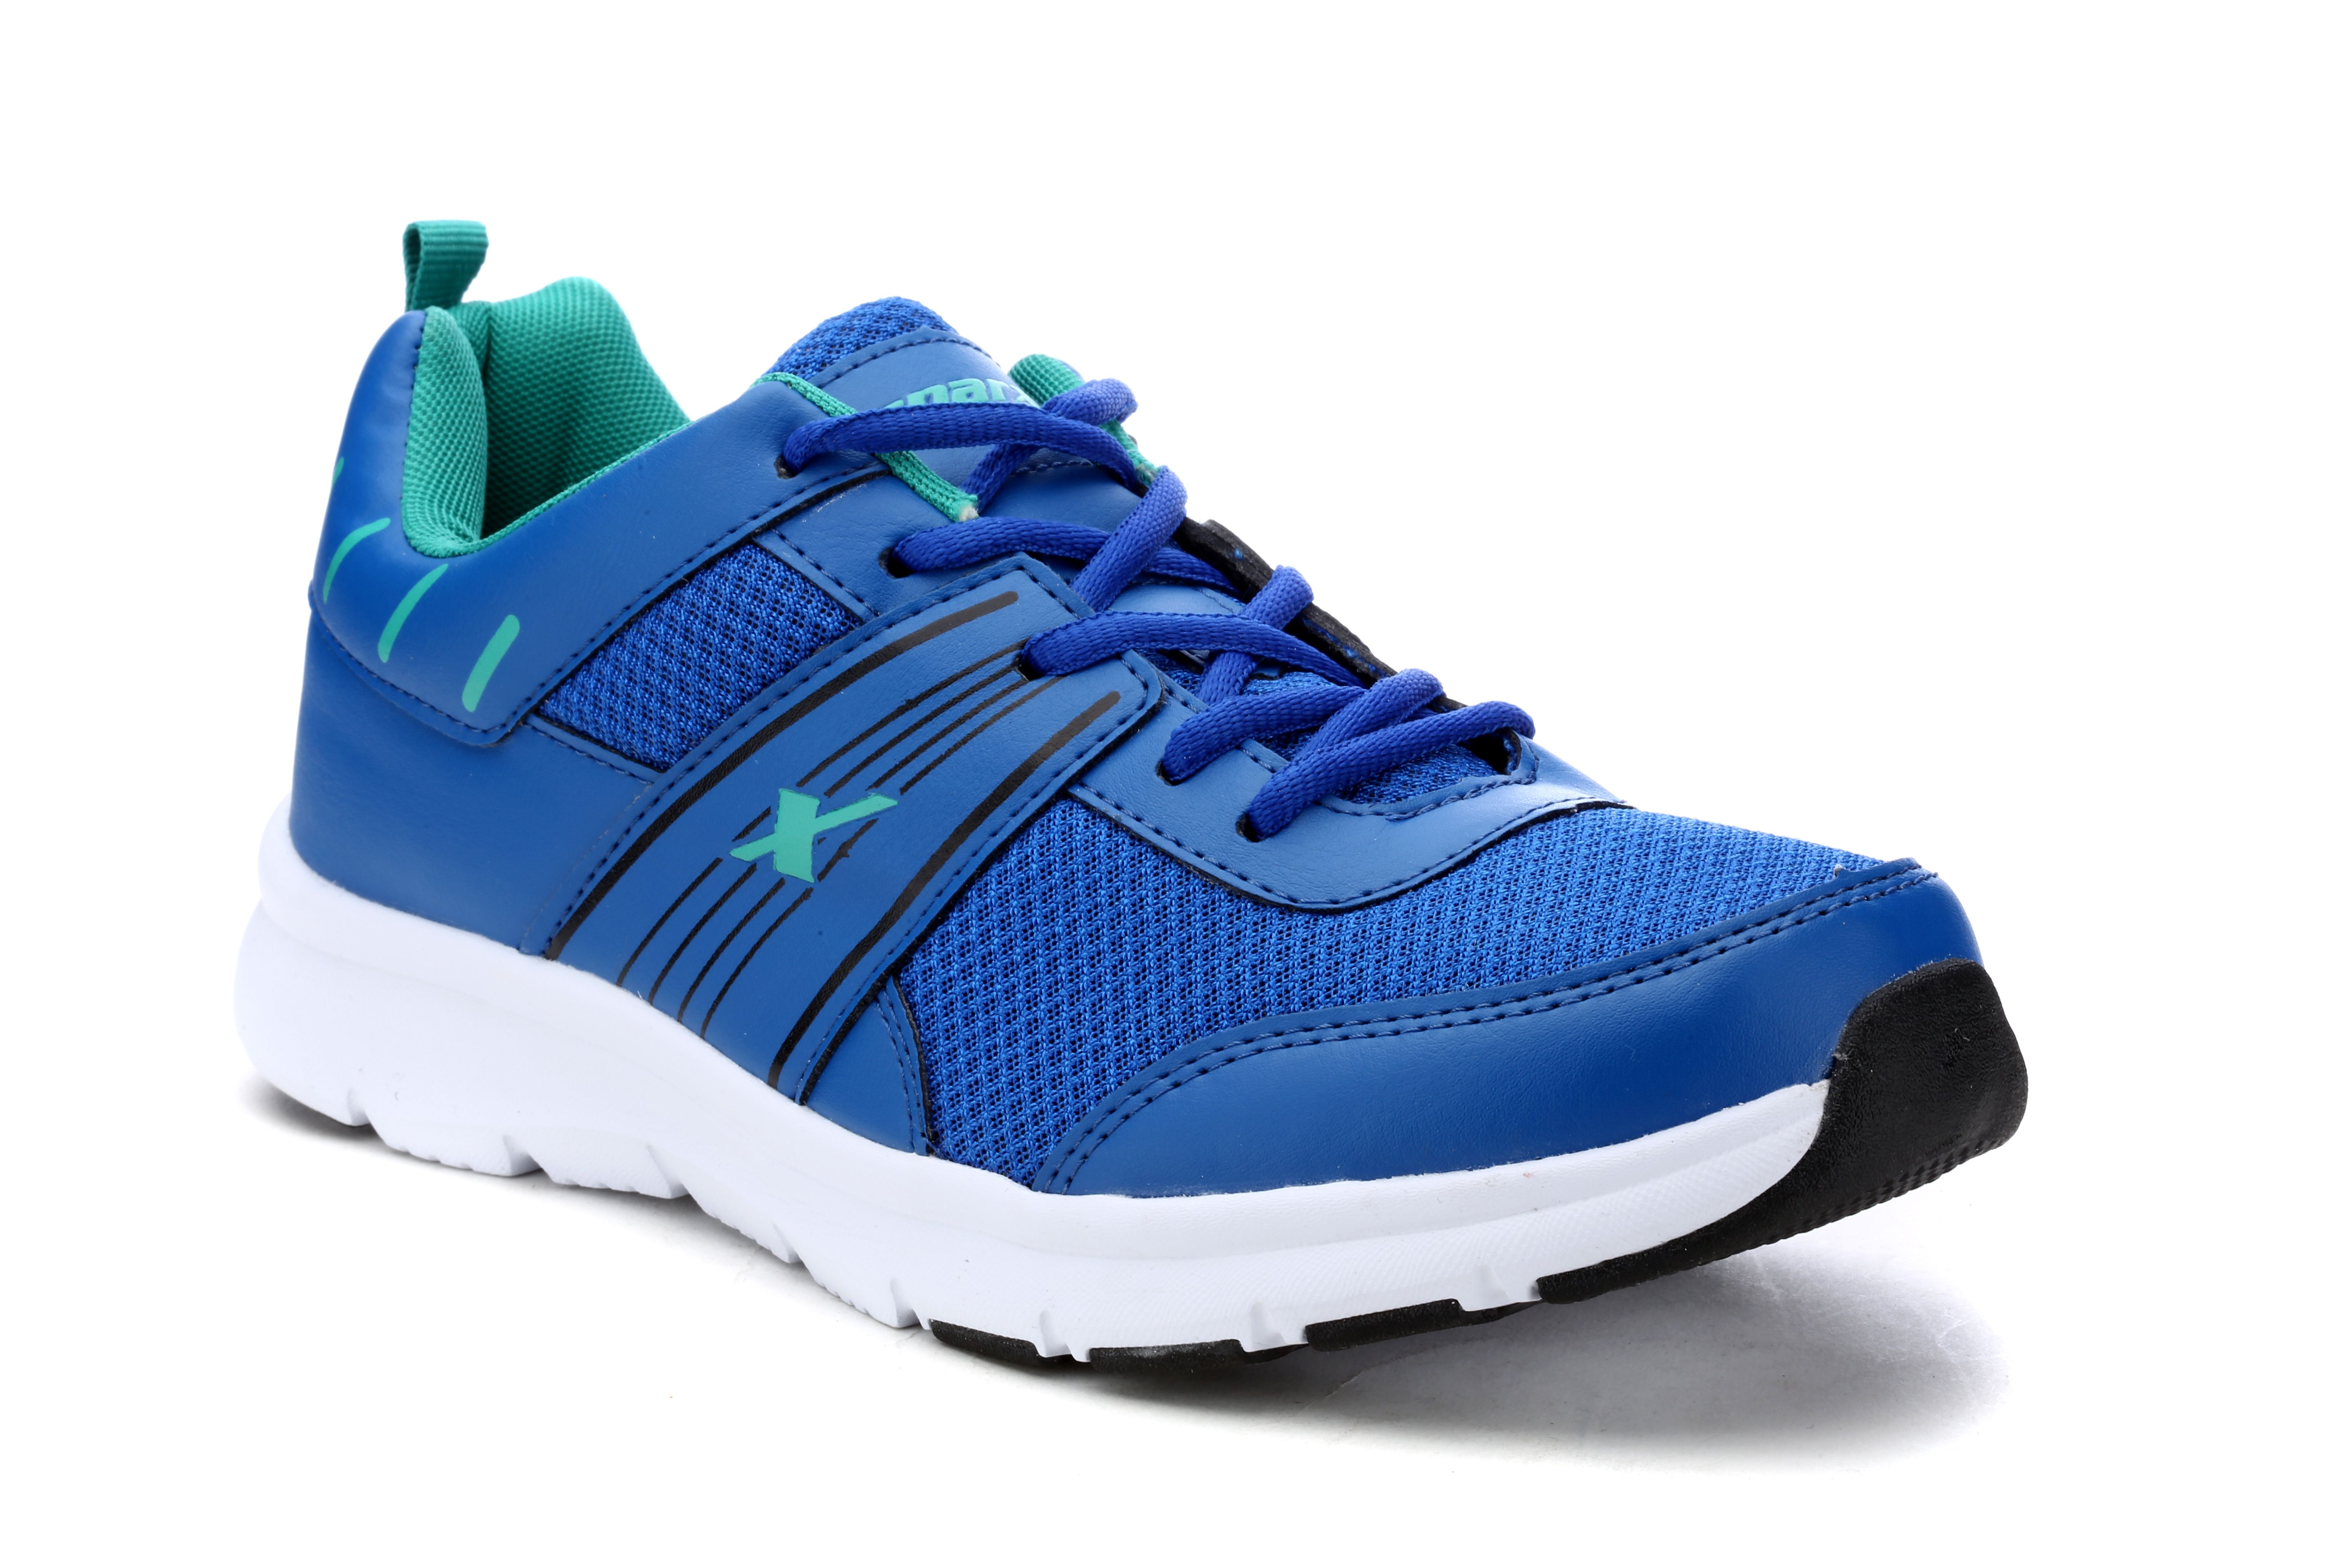 Sparx SM-9026 Blue Running Shoes - Buy 